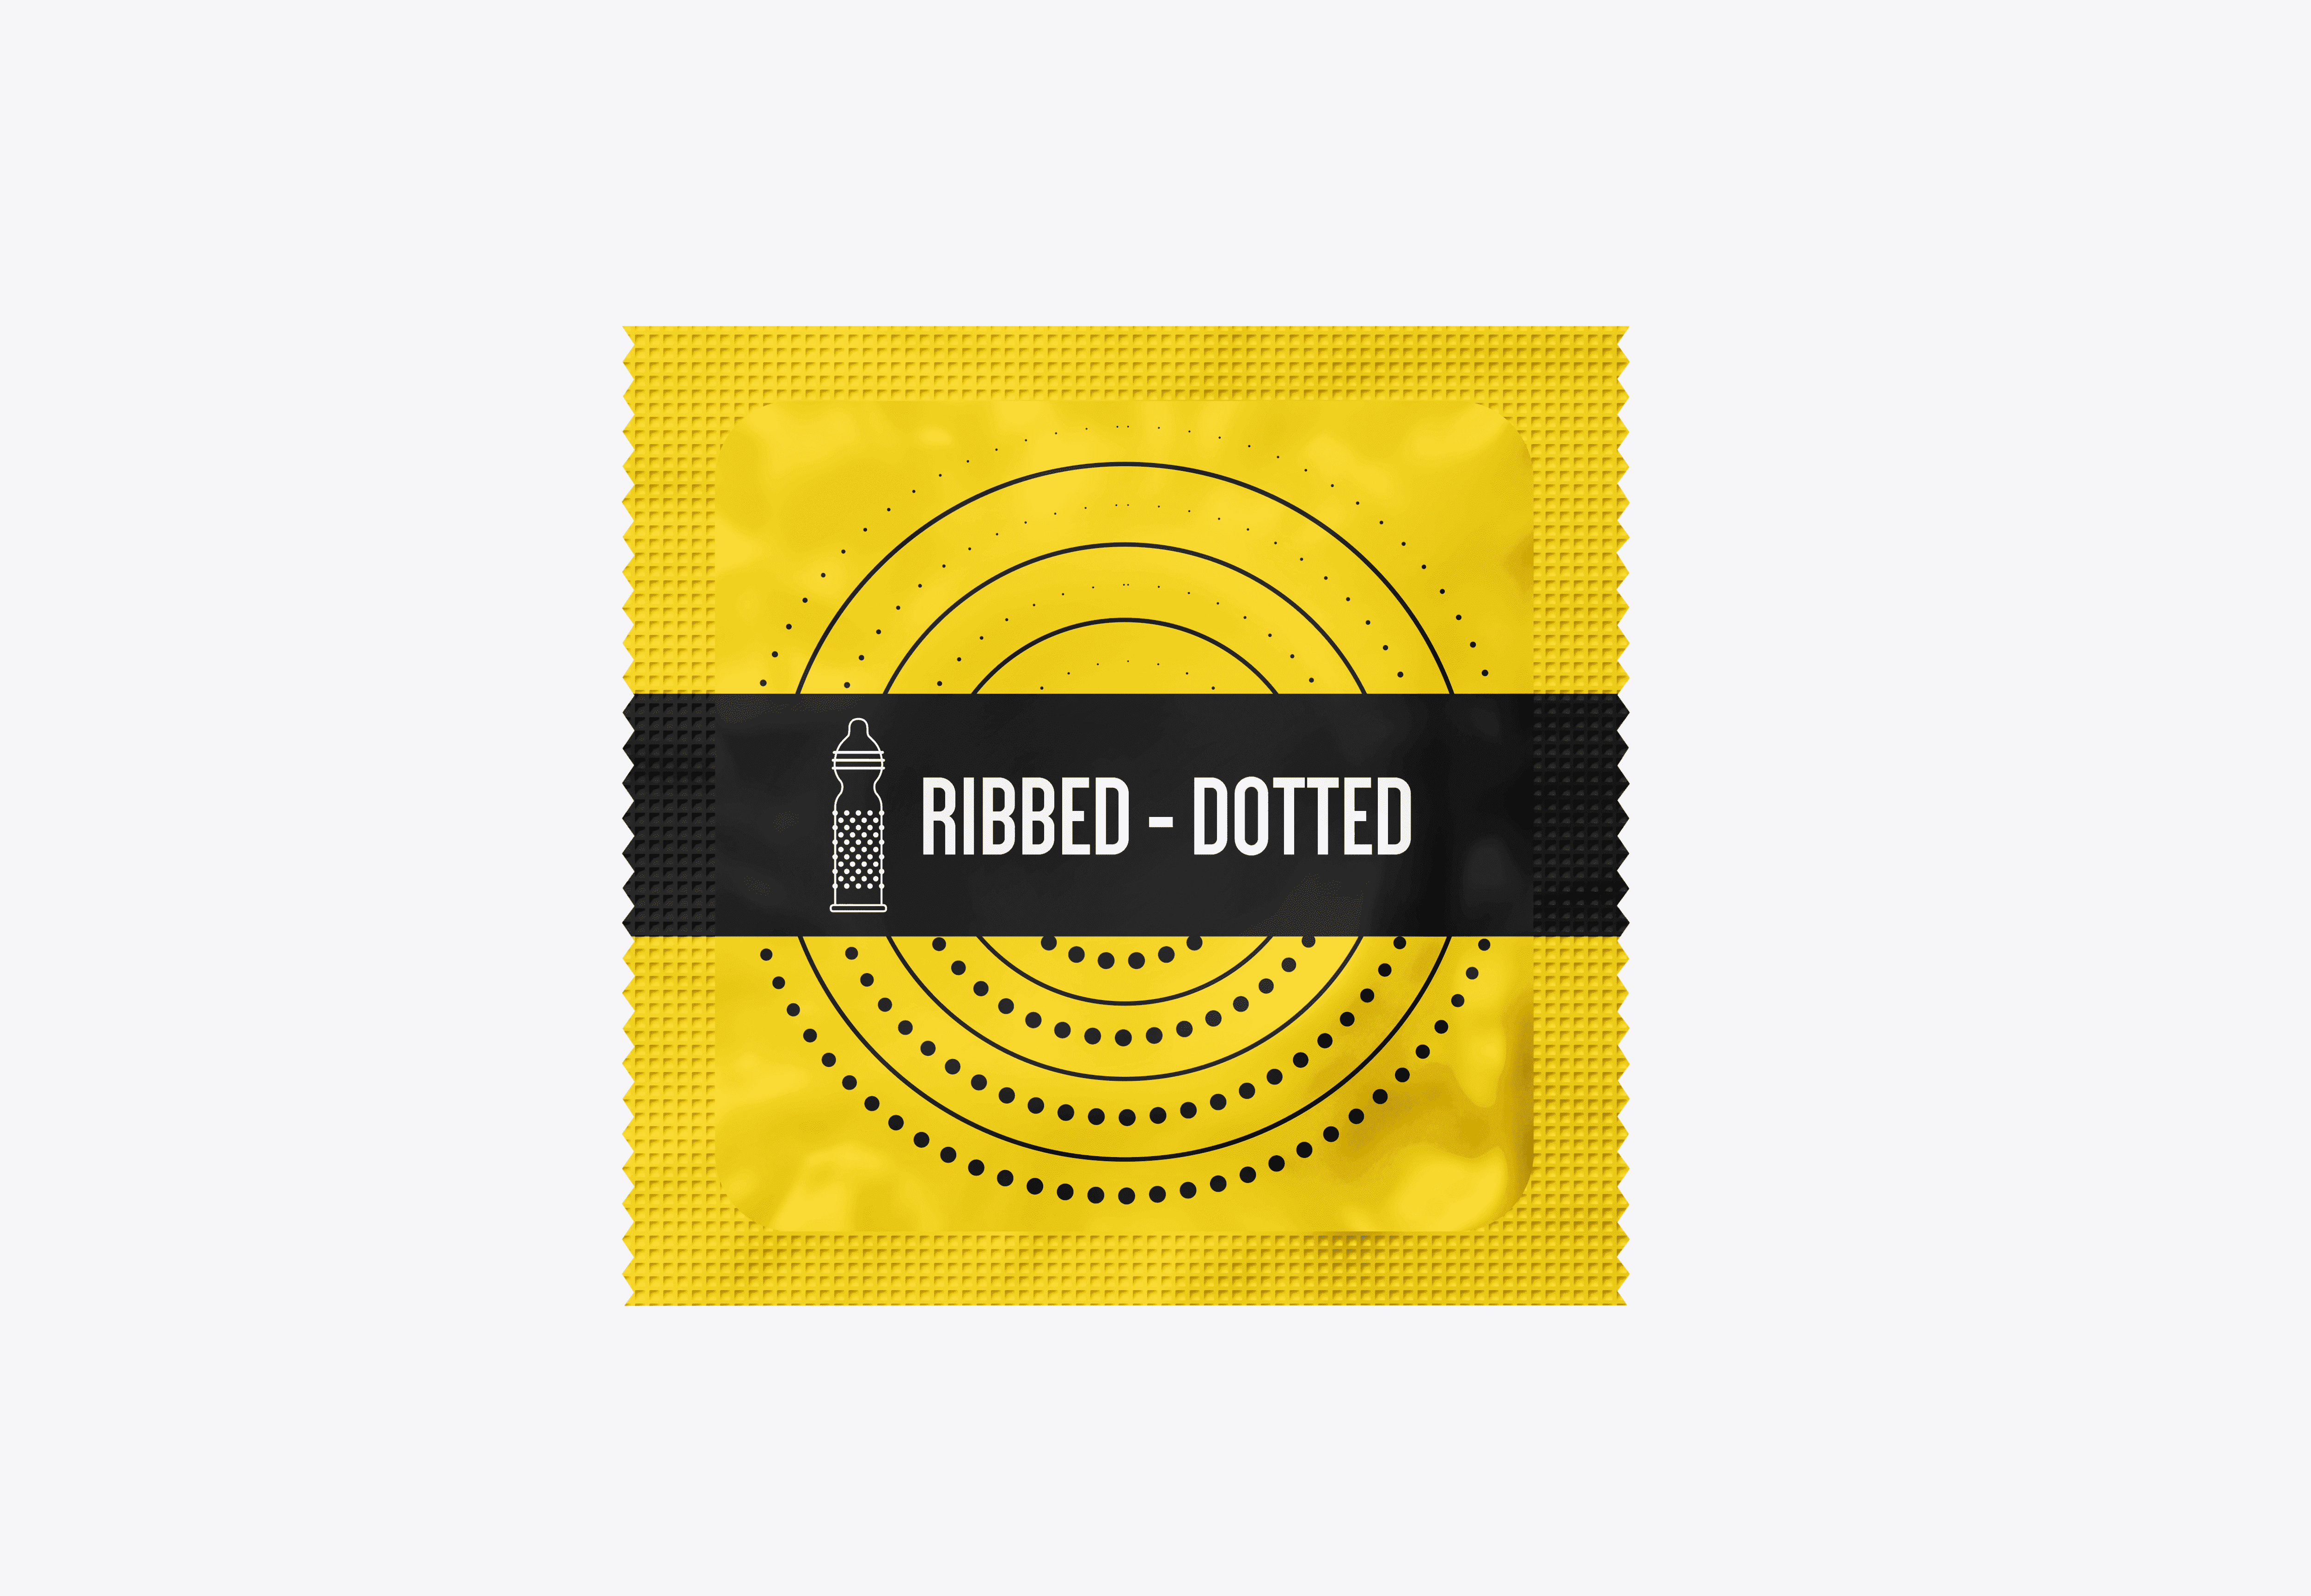 Bao Cao Su Fiesta Ribbed Dotted - Fiesta Ribbed Dotted Condom - Ribbed Dotted (3 in 1)